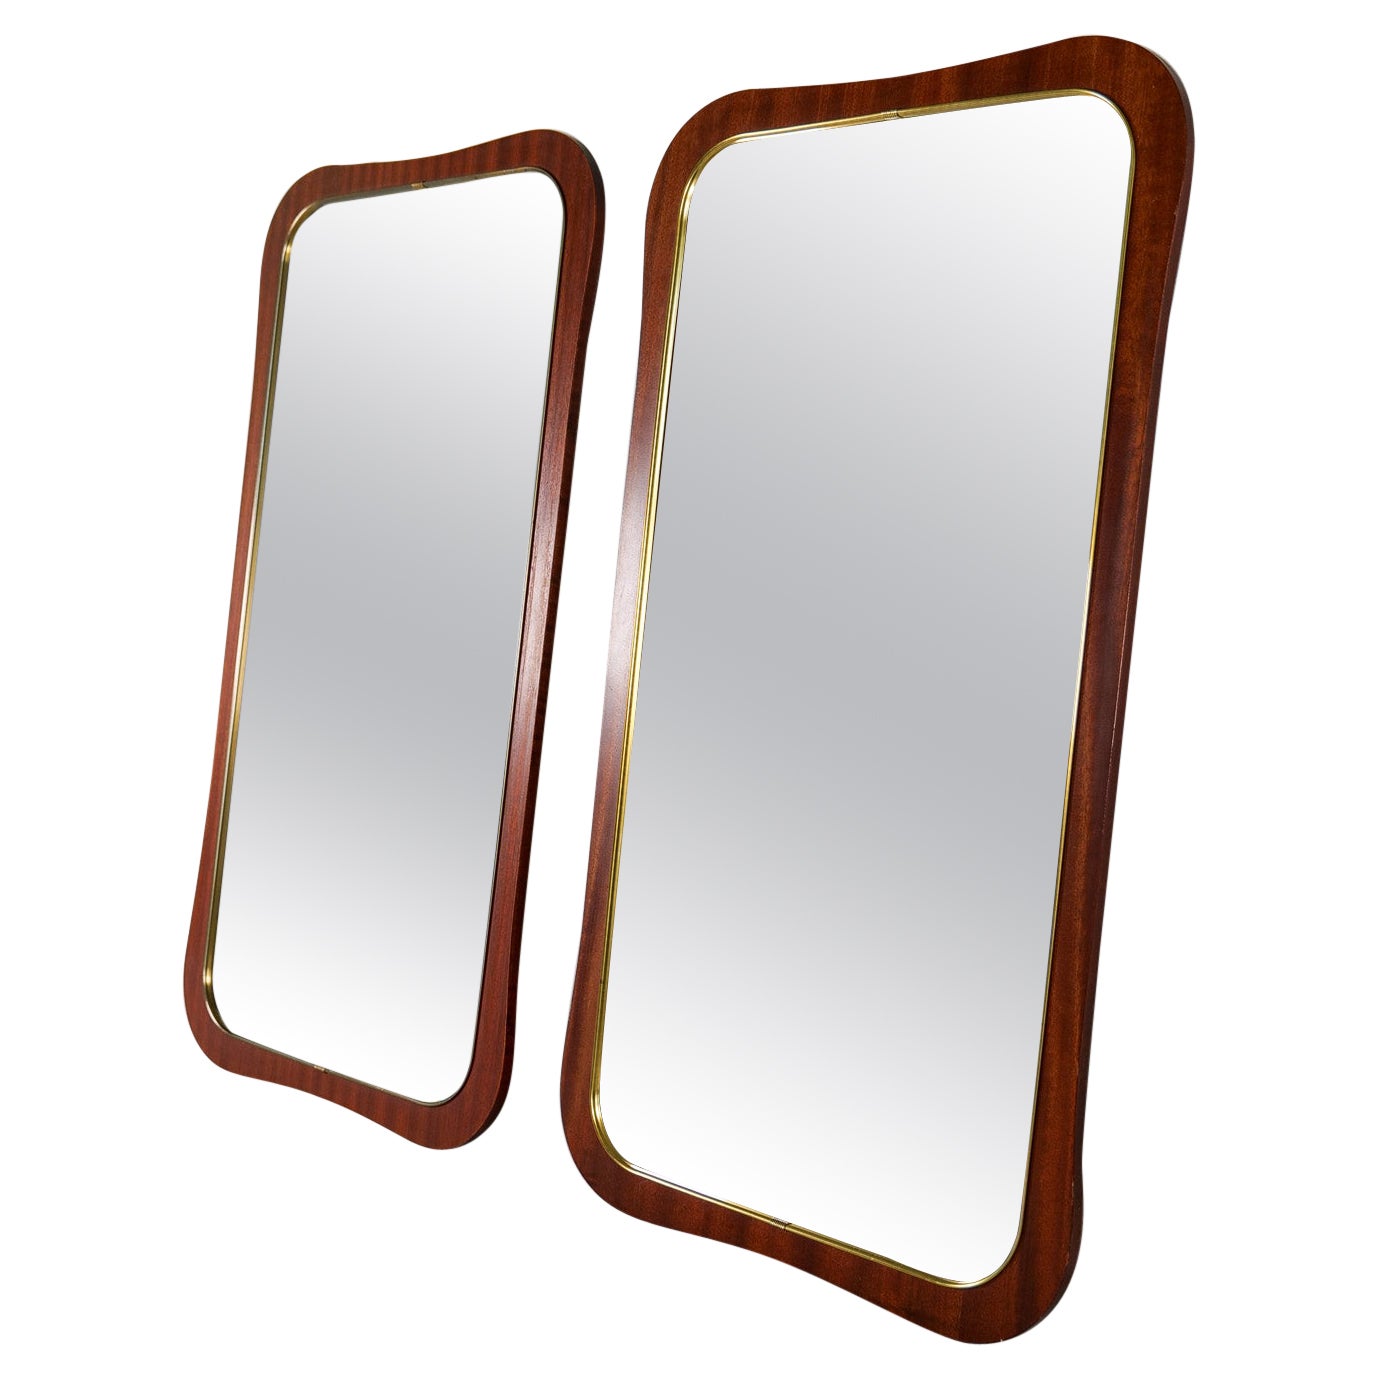 Midcentury Modern Pair of Wood and Brass Mirrors Sweden 1950s For Sale